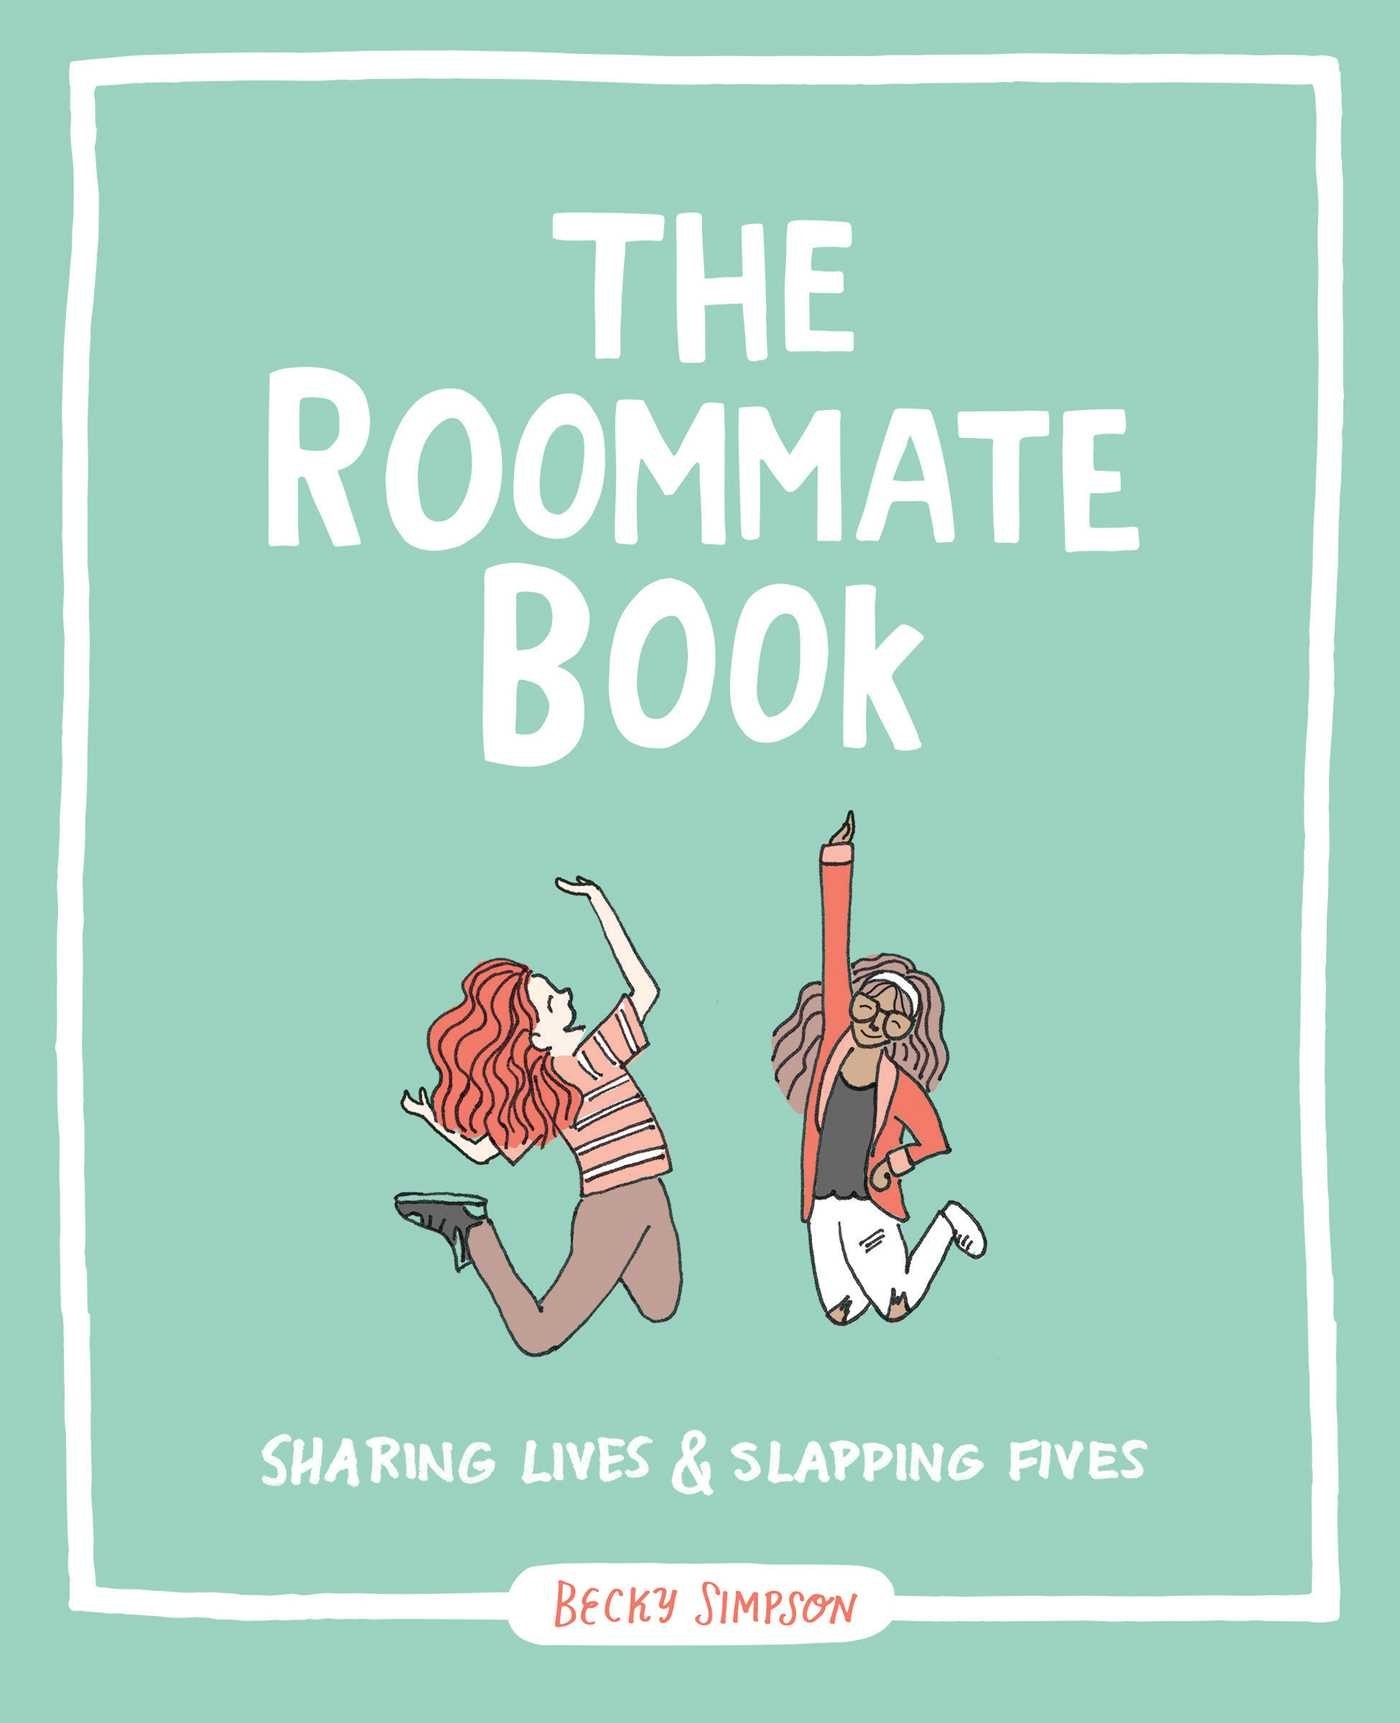 Roommate share